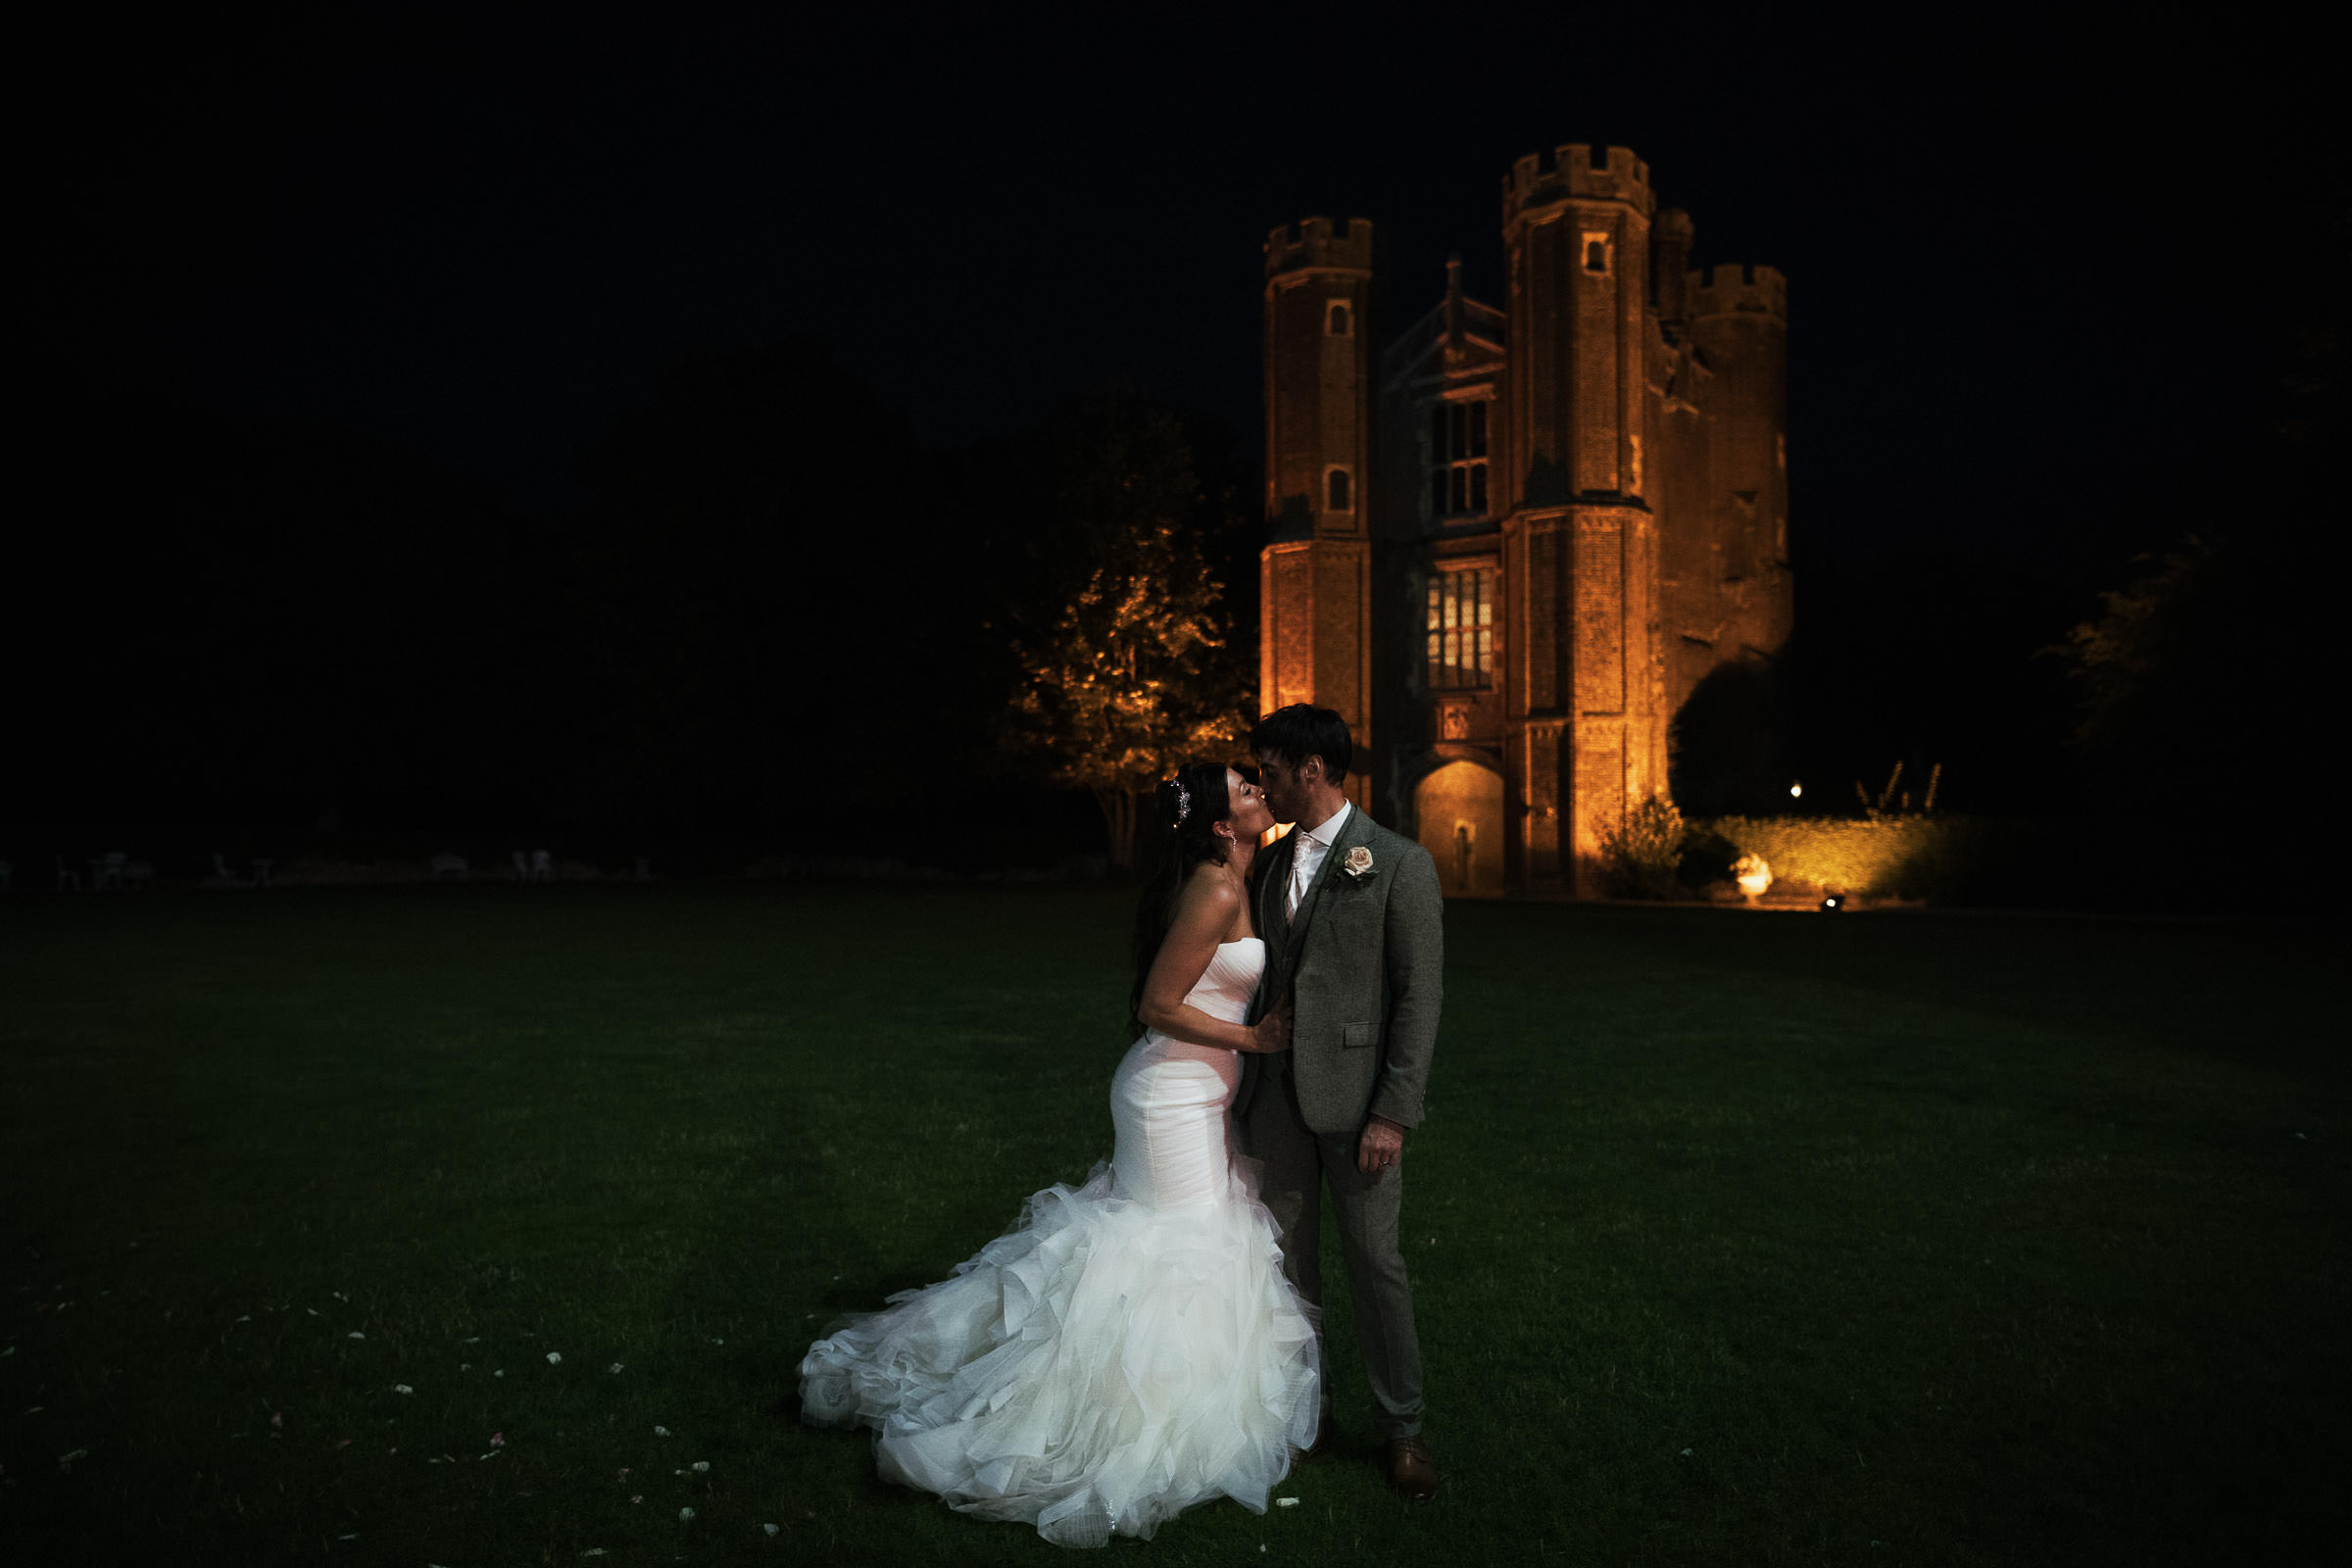 Newly married couple kiss on the lawn with the Great Tower at Leez Priory in the background. Lit up at night. Bride is wearing the Pronovias Barcelona Mildred Wedding Gown.